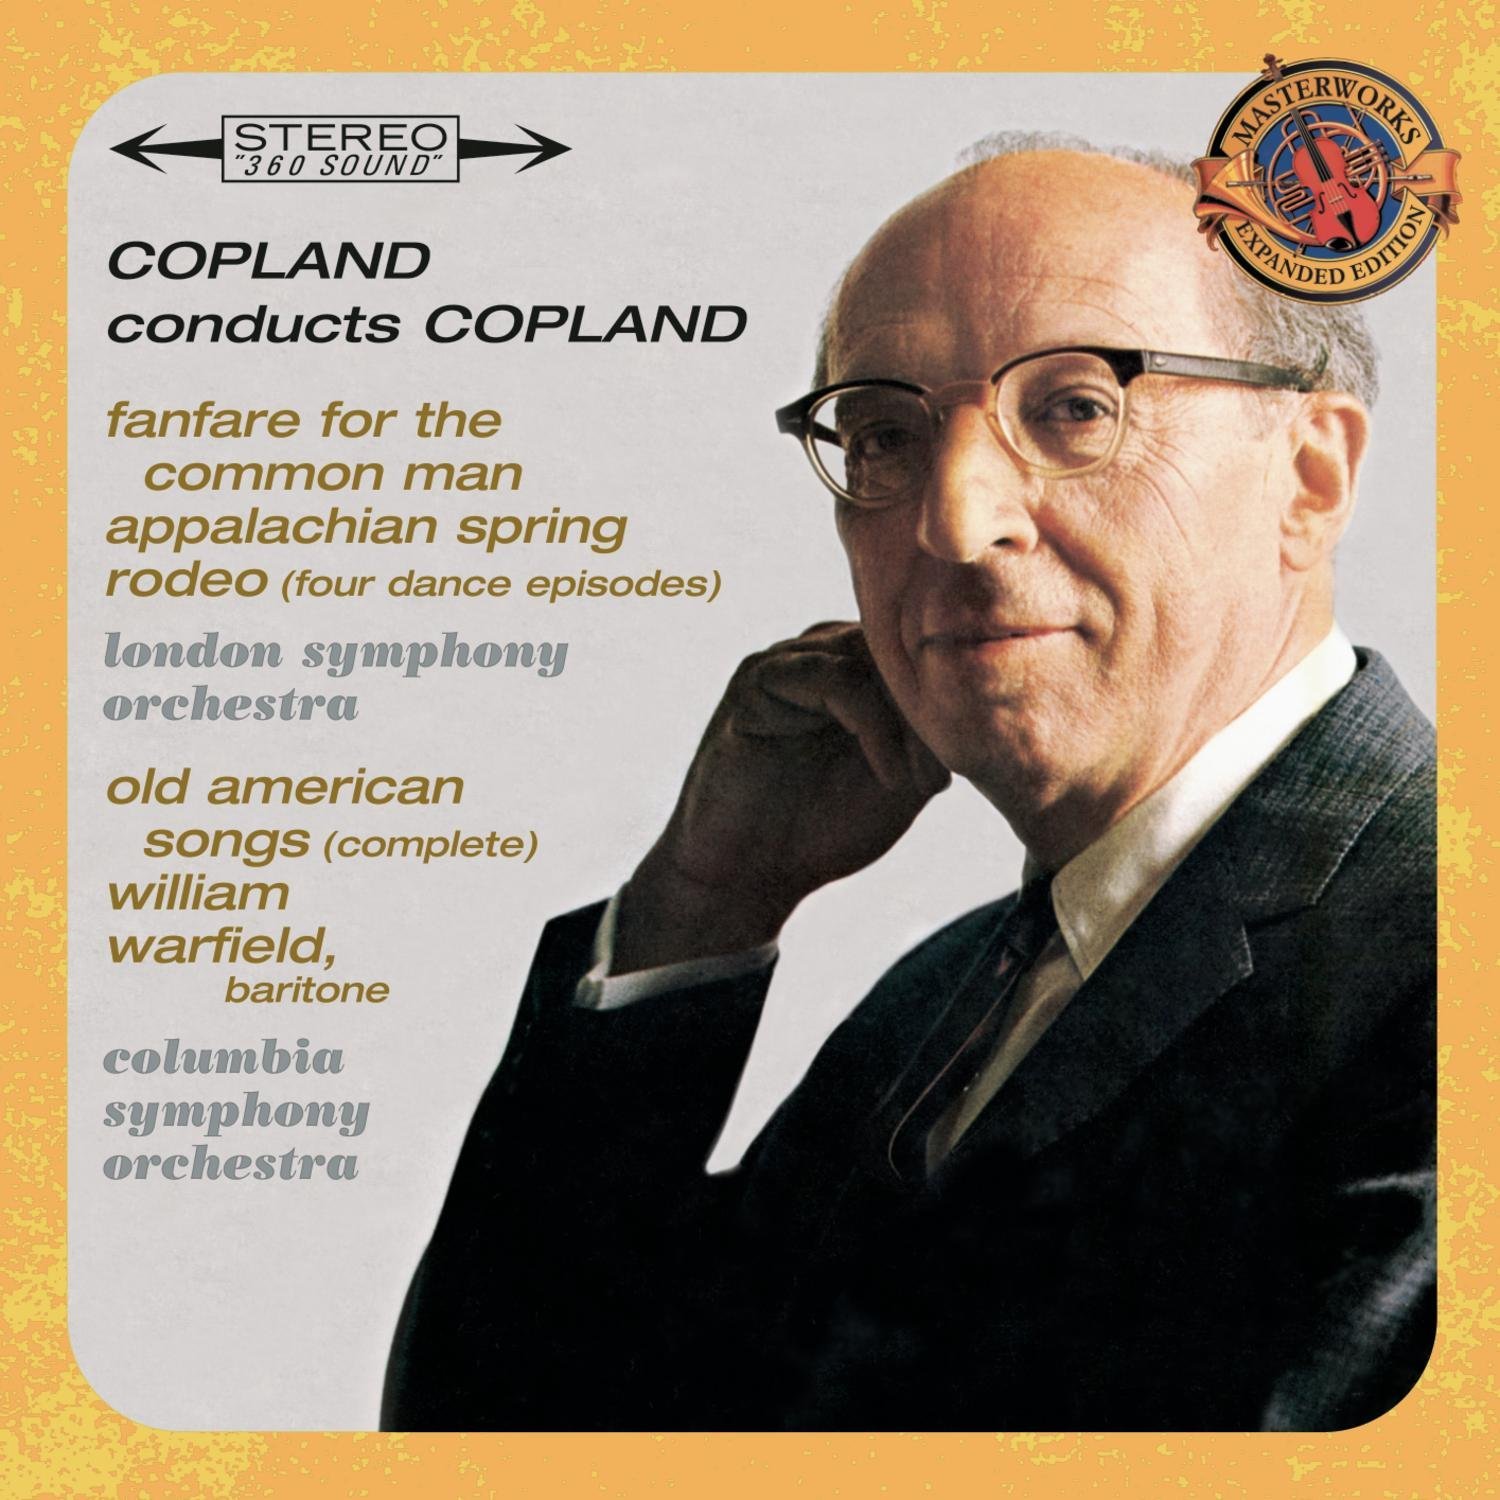 Copland Conducts Copland - Expanded Edition Fanfare for the Common Man, Appalachian Spring, Old American Songs Complete Rodeo: Four Dance Episodes